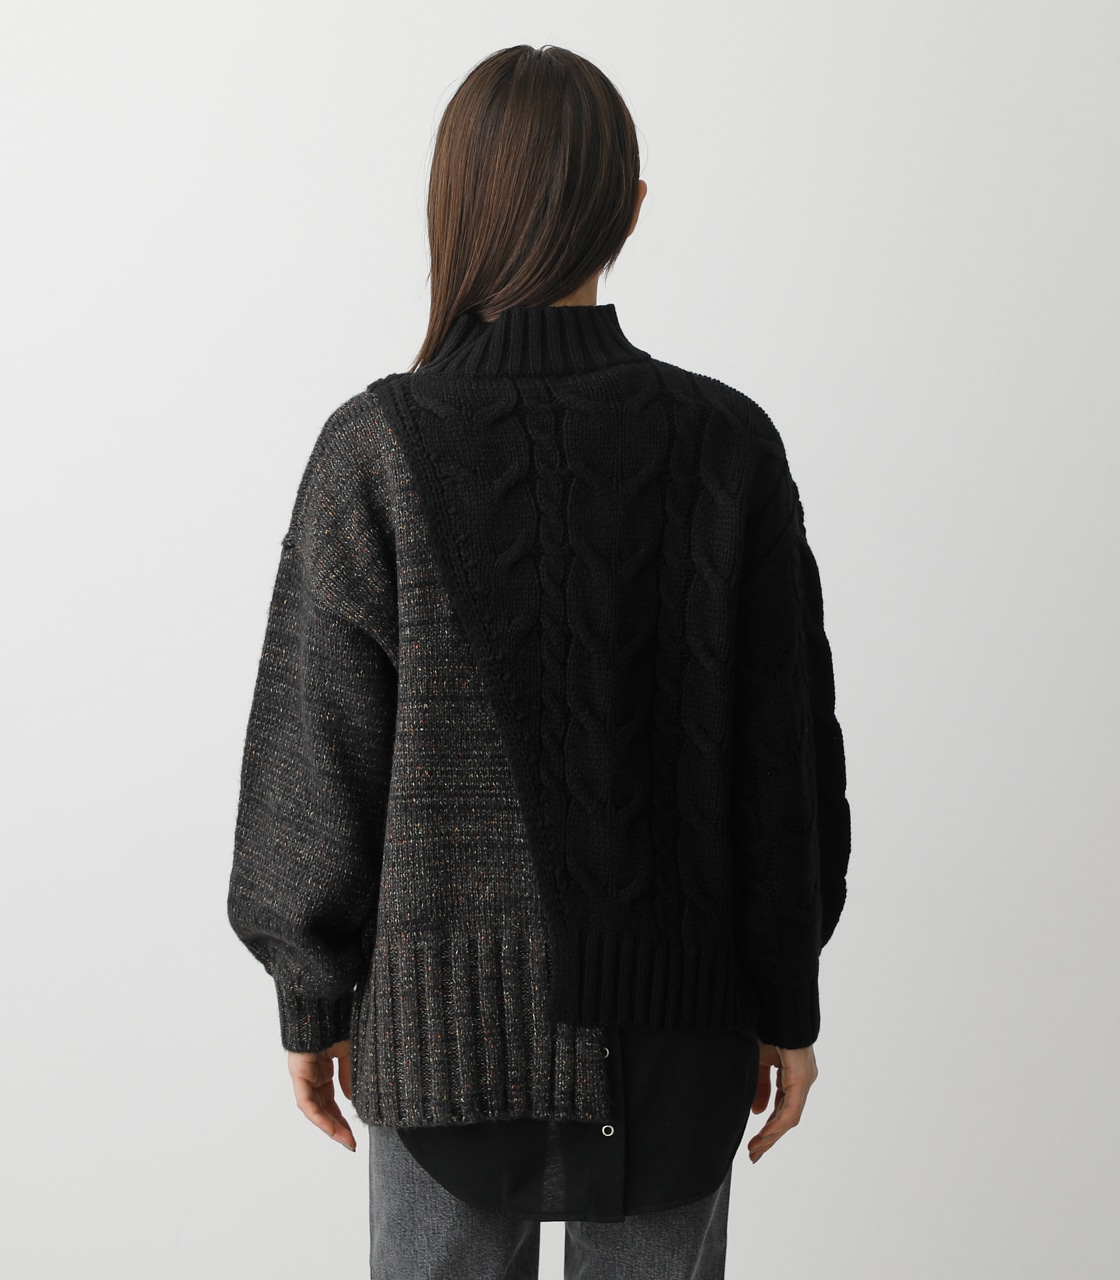 ASYMMETRY CABLE KNIT TOPS/アシンメトリーケーブルニットトップス 詳細画像 BLK 7